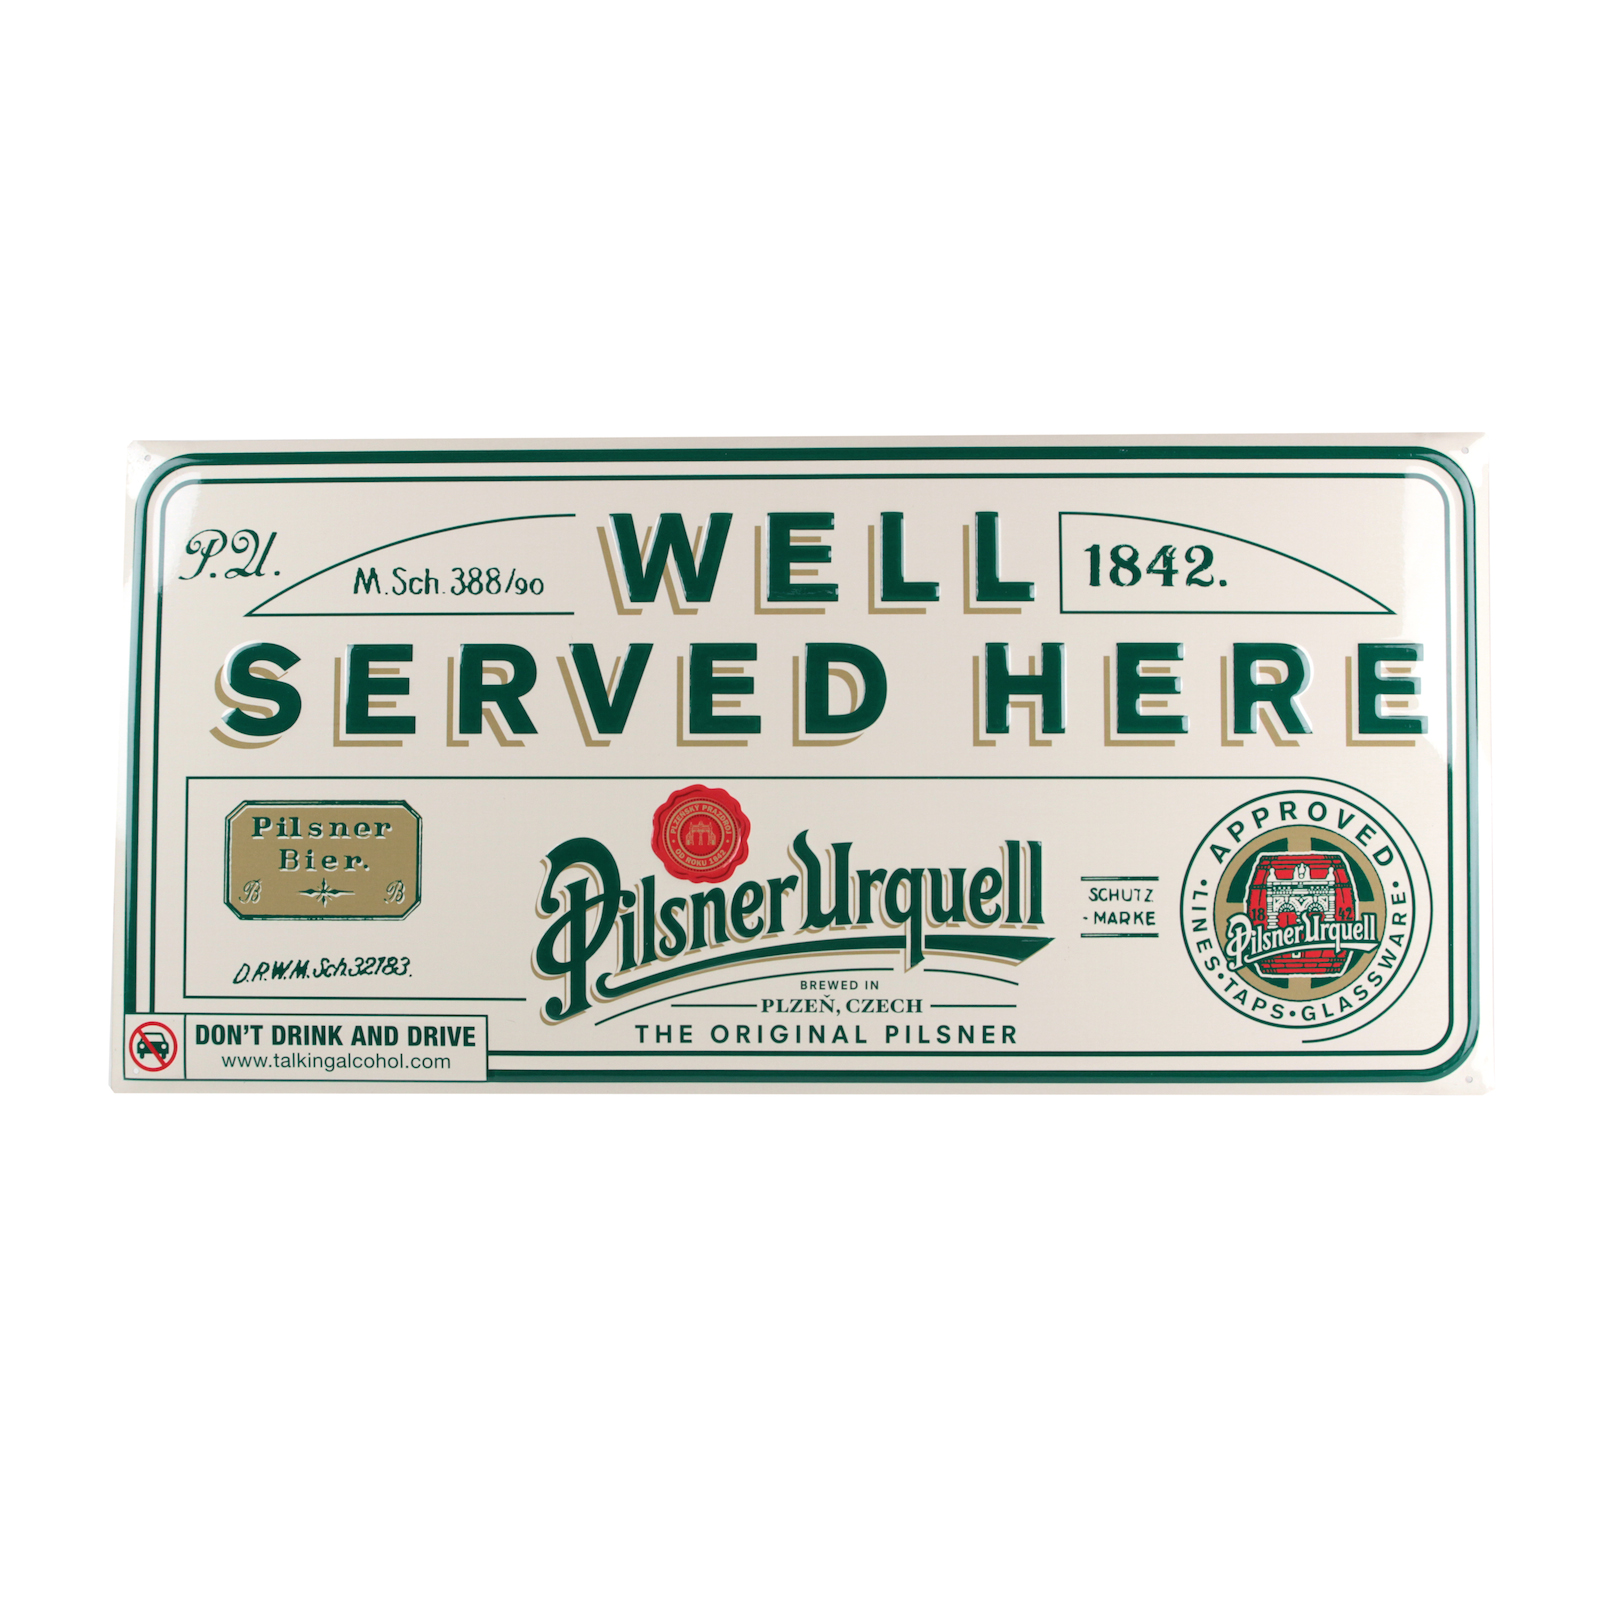 "Well served here" metal sign - 3D